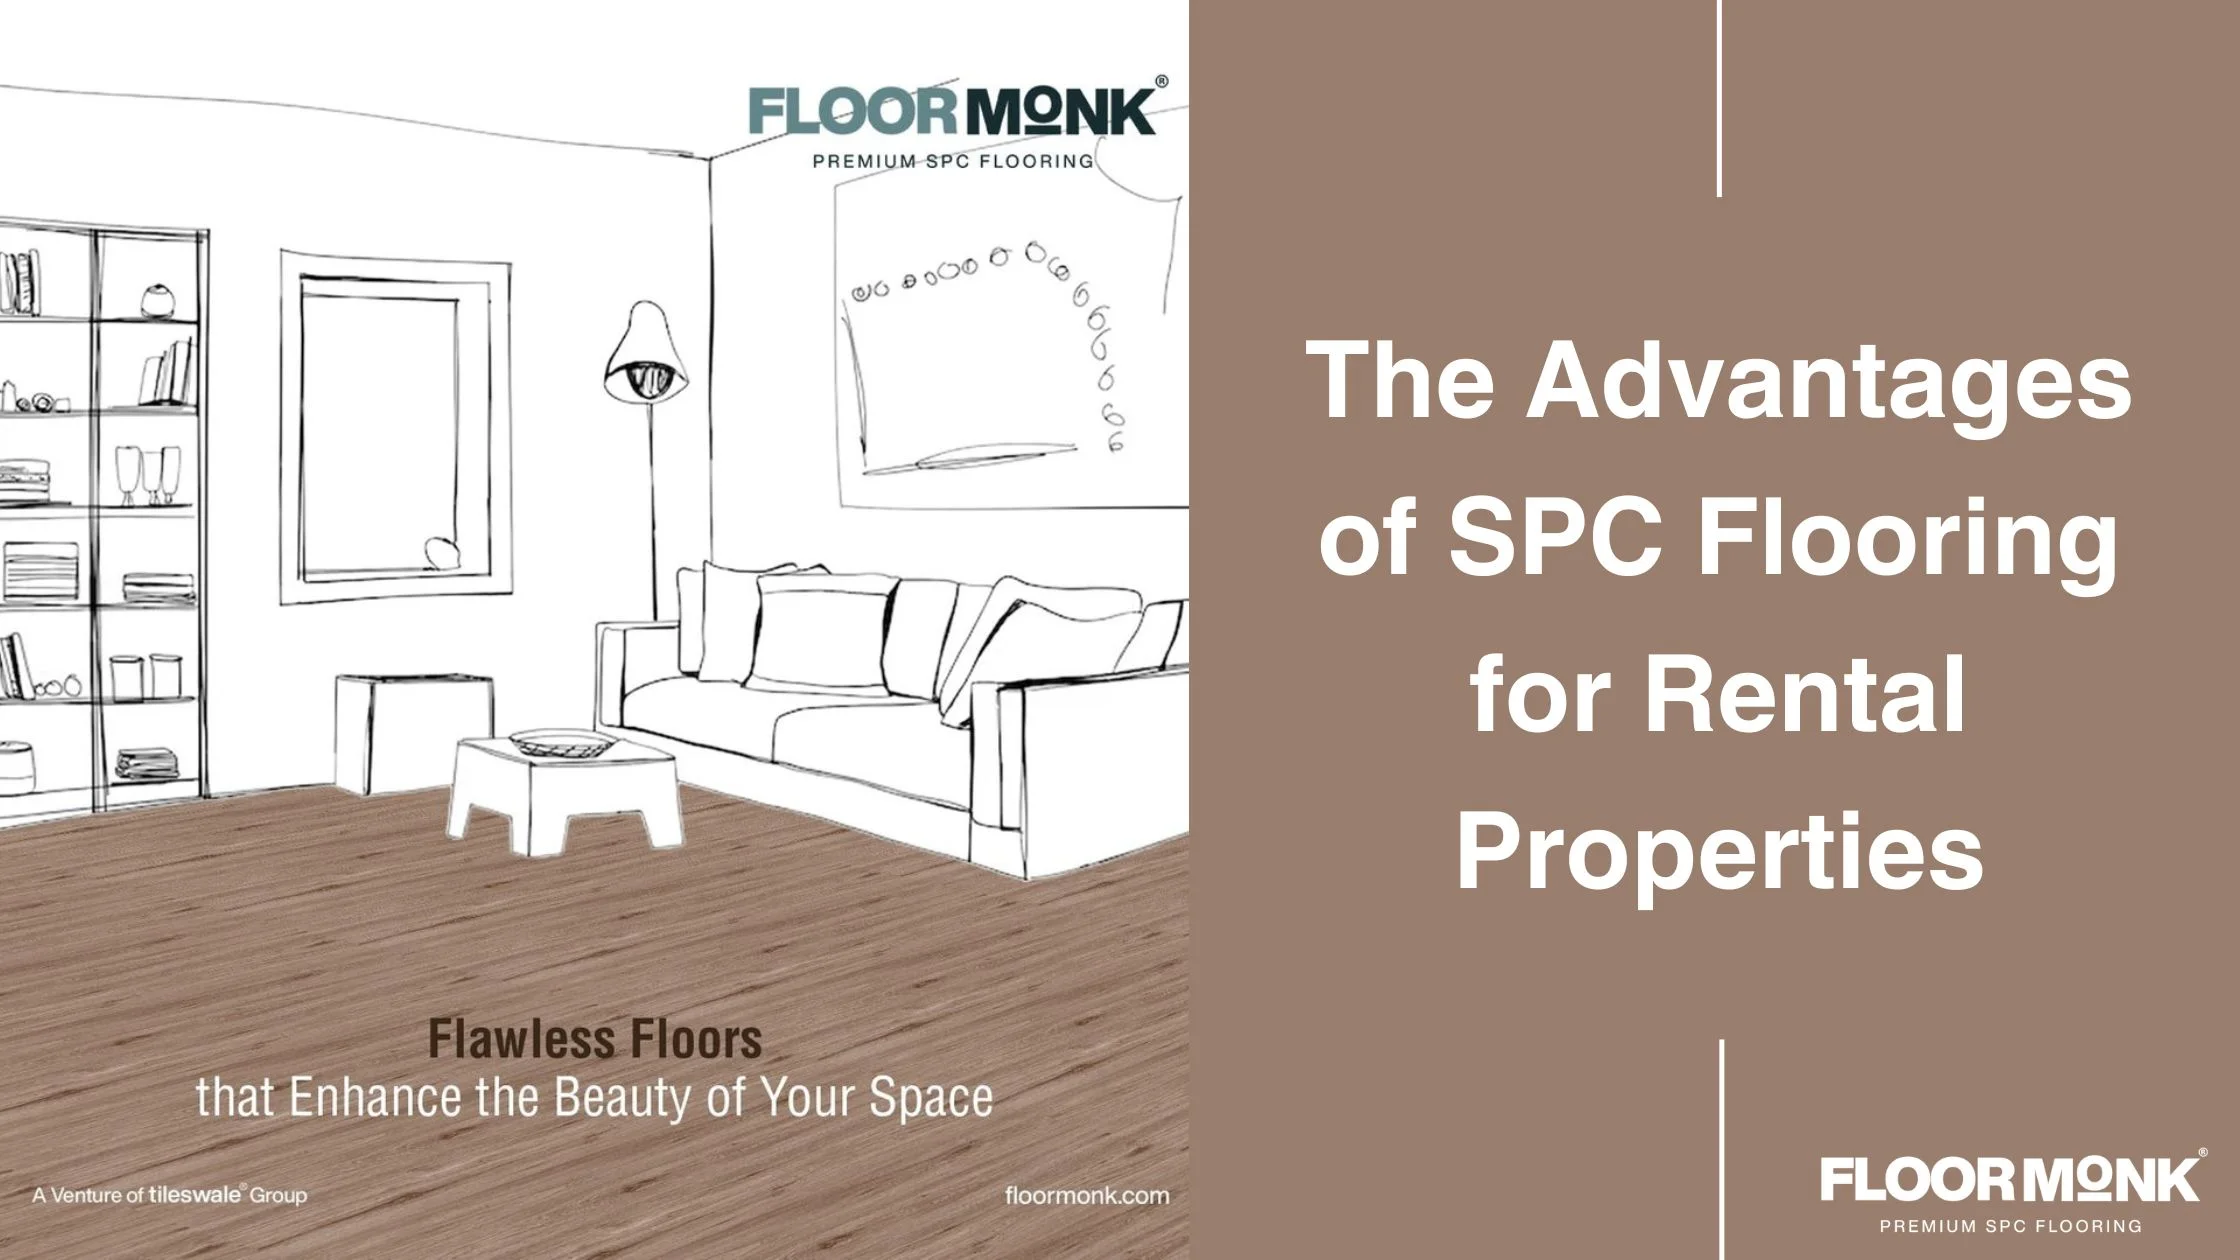 The Advantages Of SPC Flooring For Rental Properties